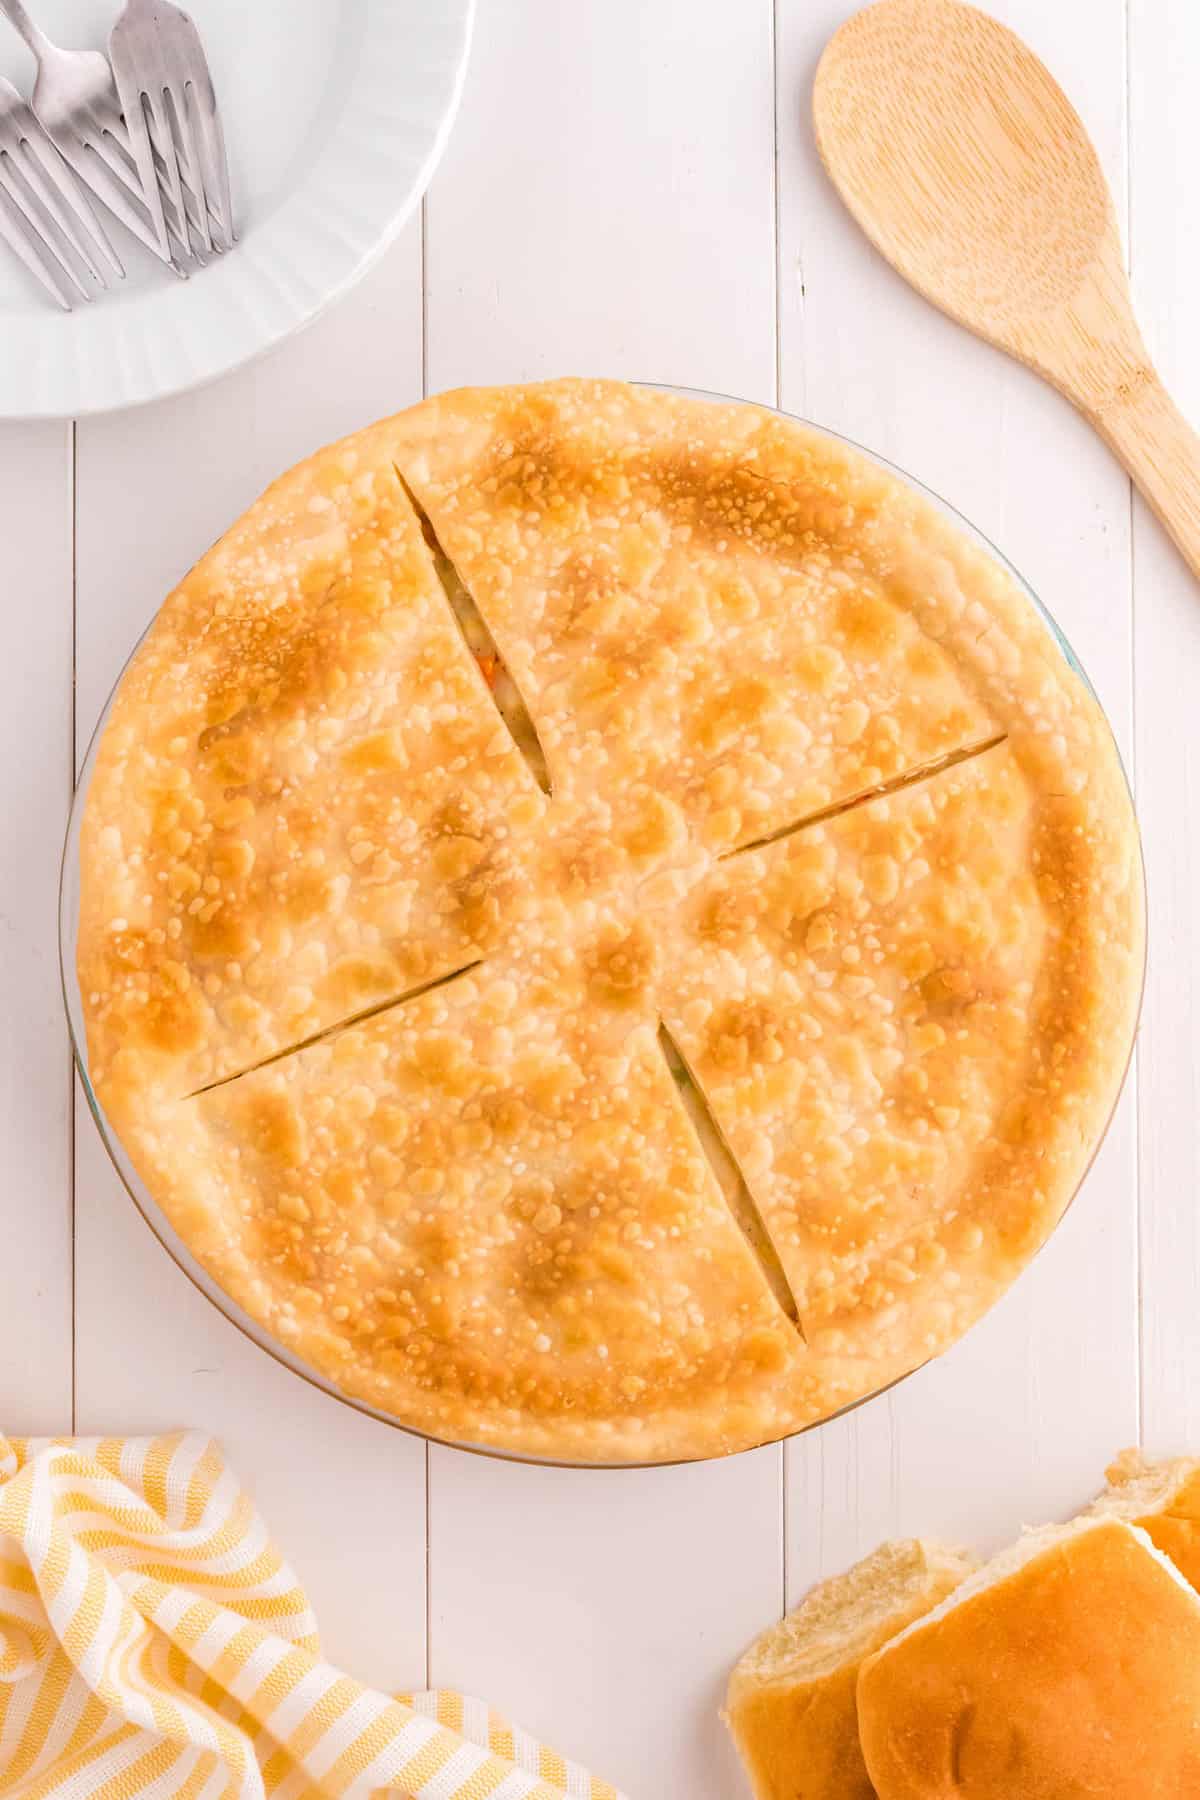 Overhead Image of Baked Chicken Pot Pie with a Golden Brown Flakey Crust